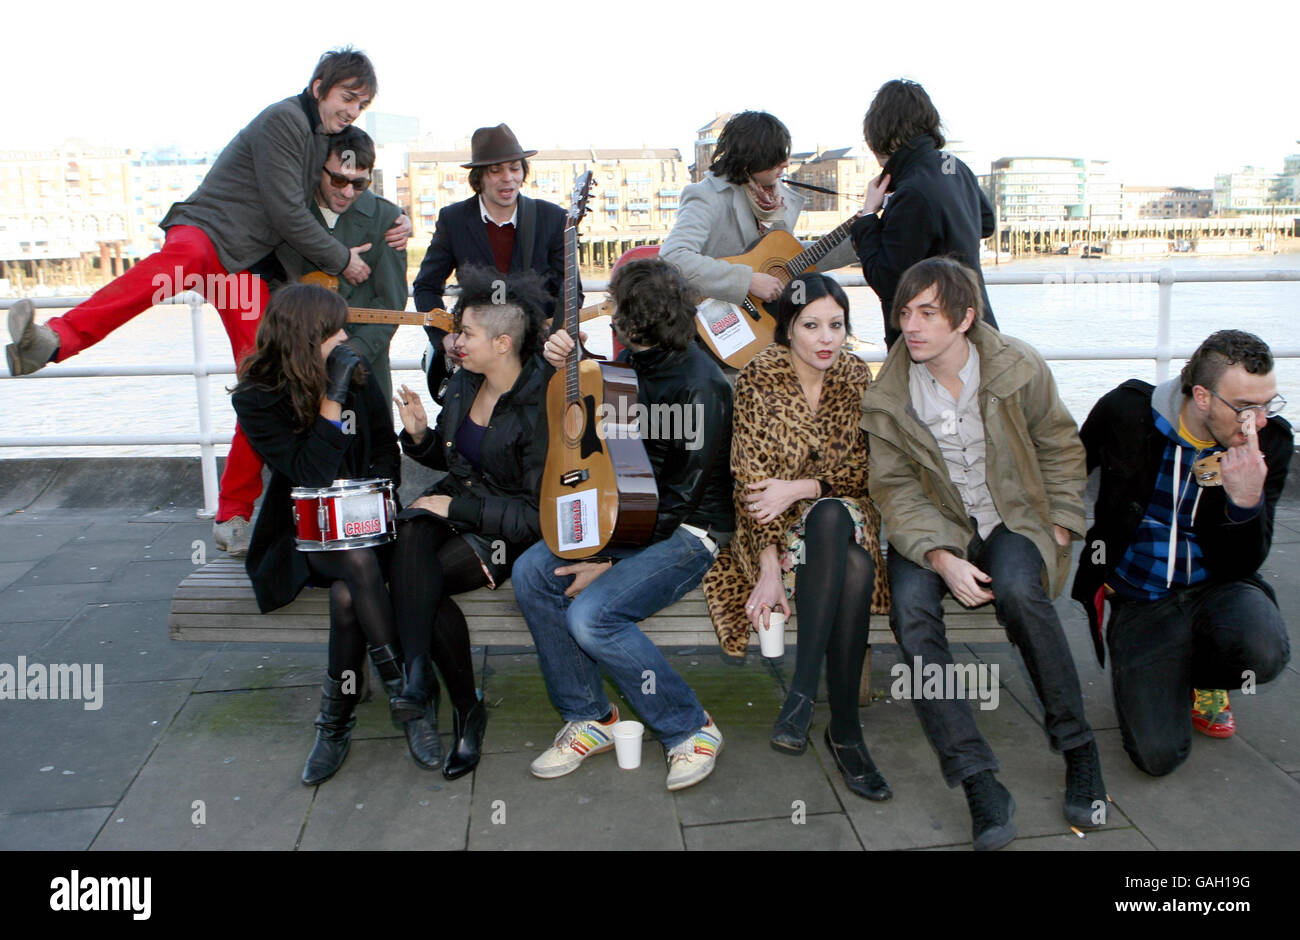 (back row, left-right) Danny Goffey from Supergrass, Graham Coxon from Blur, Gaz Coombes from Supergrass, Carl Barat and Didz Hammond from Dirty Pretty Things, (front row left-right) Sarah Jones, Tahita Bulmer and Andy Spence from the New Young Pony Club, fashion designer Pearl Lowe, Drew McConnell from Babyshambles and Jon McClure from Reverend and the Makers raise awareness for the homelessness charity Crisis' 'Consequences' campaign outside the Design Museum in London. Stock Photo